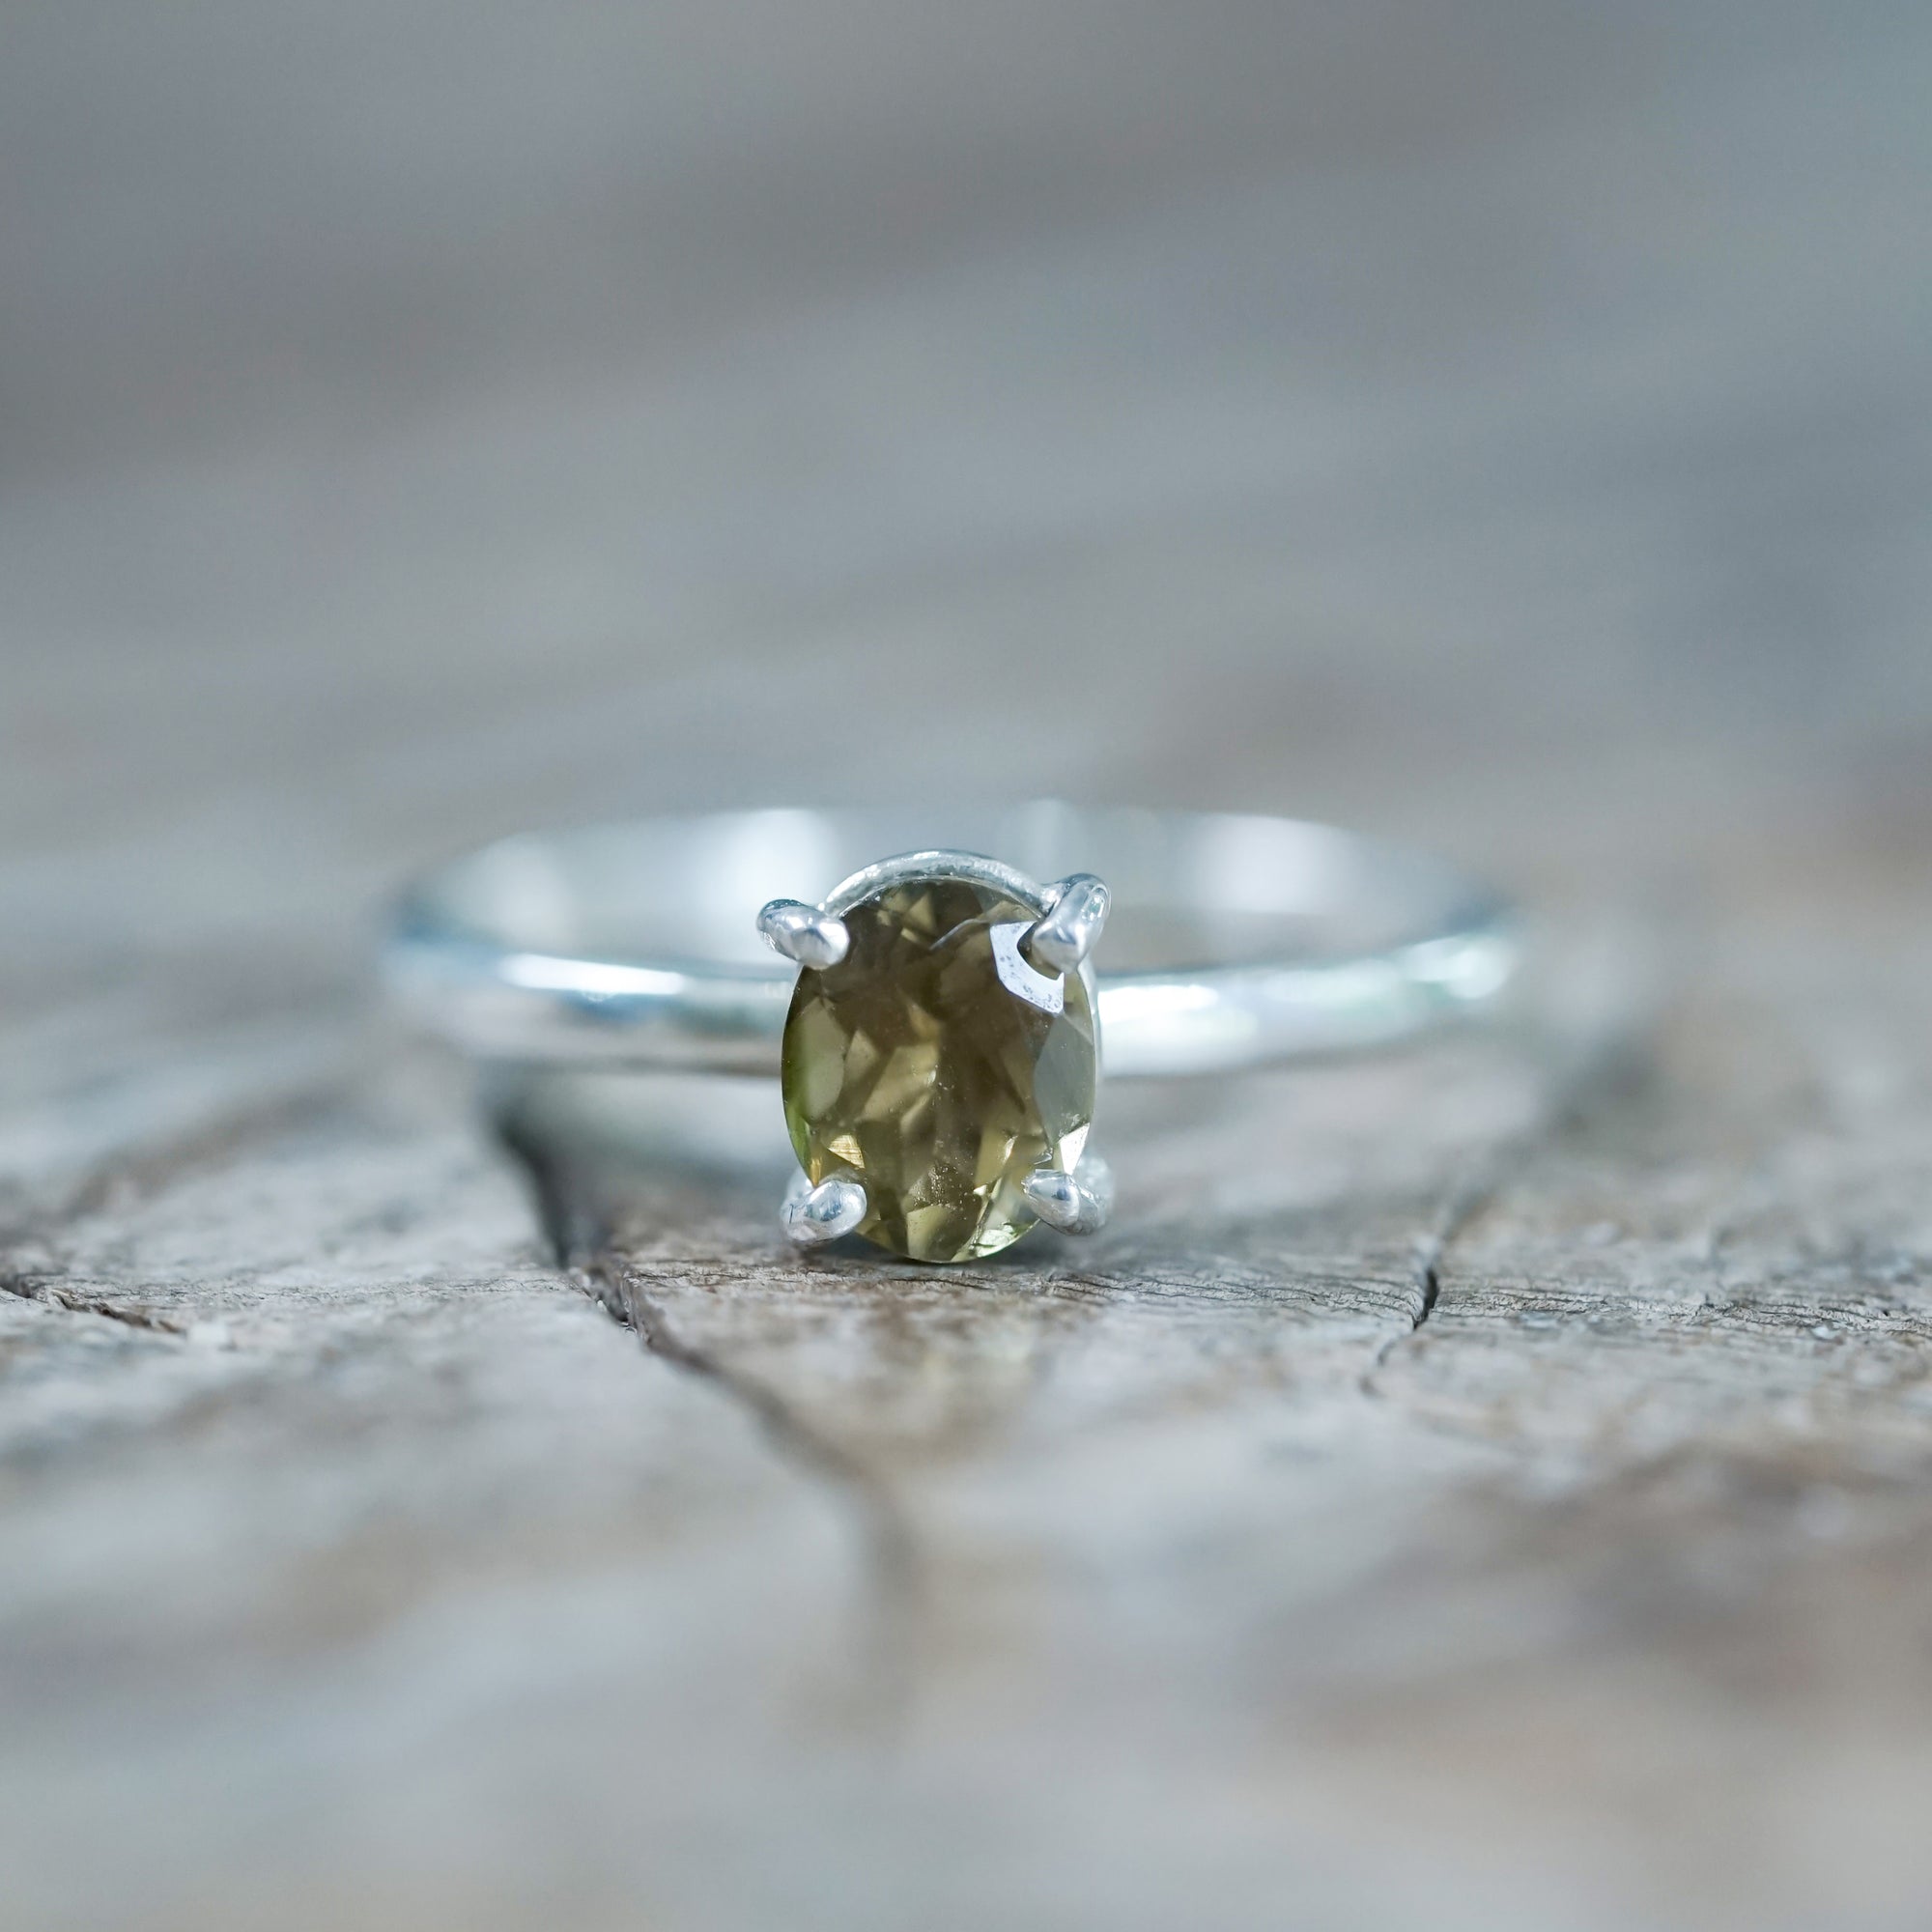 Olive Green Tourmaline Ring - Gardens of the Sun | Ethical Jewelry